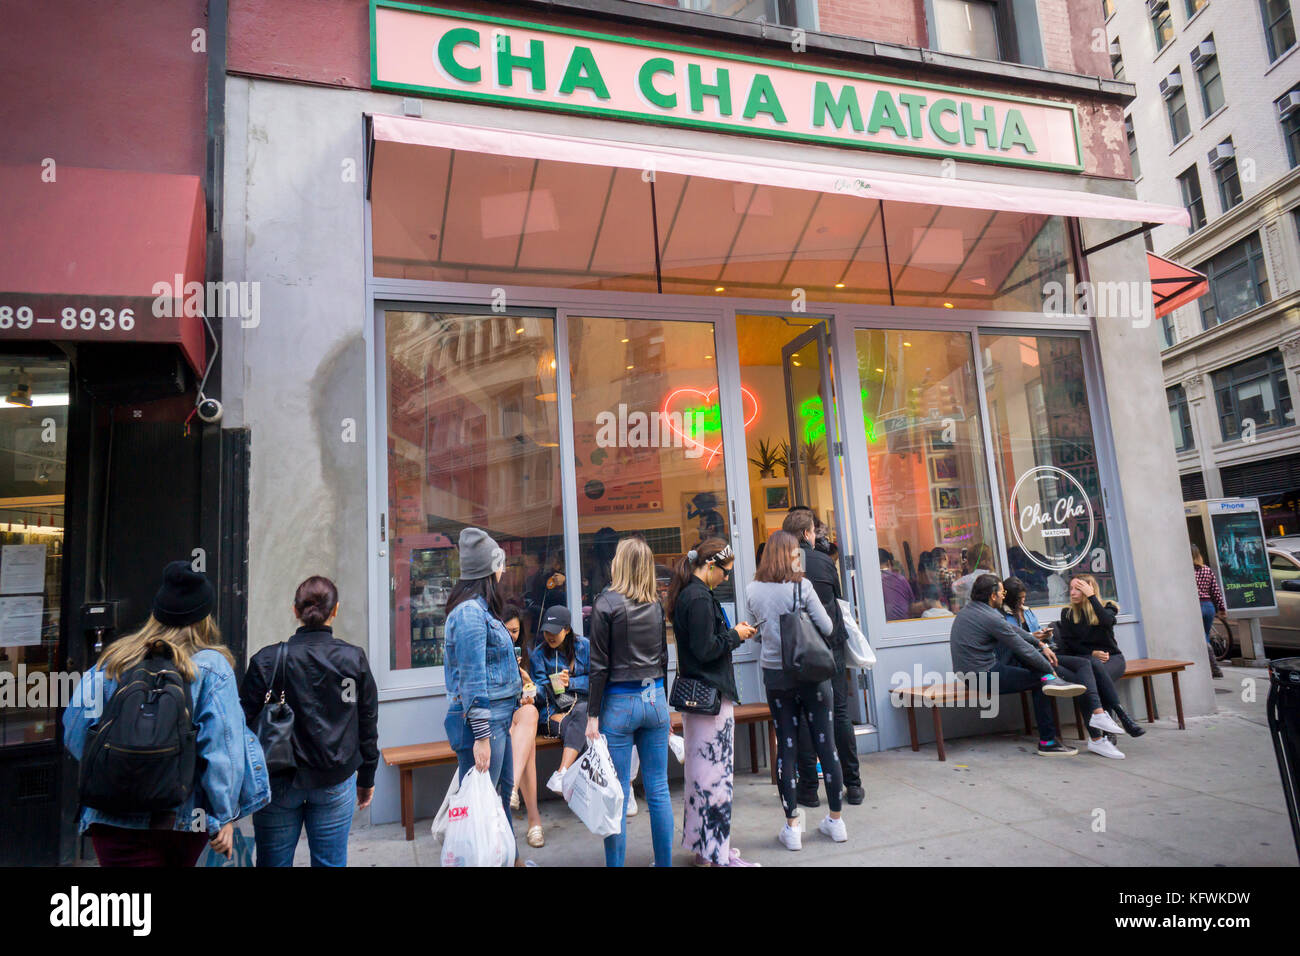 People line up for their fix of matcha at Cha Cha Matcha in the NoMad neighborhood of New York on Saturday, October 28, 2017. The popular beverage, matcha, is ground green tea and is used in Cha Cha Matcha to make instagramable beverages popular with millennials. Loaded with antioxidants matcha supposedly has medicinal qualities. (© Richard B. Levine) Stock Photo